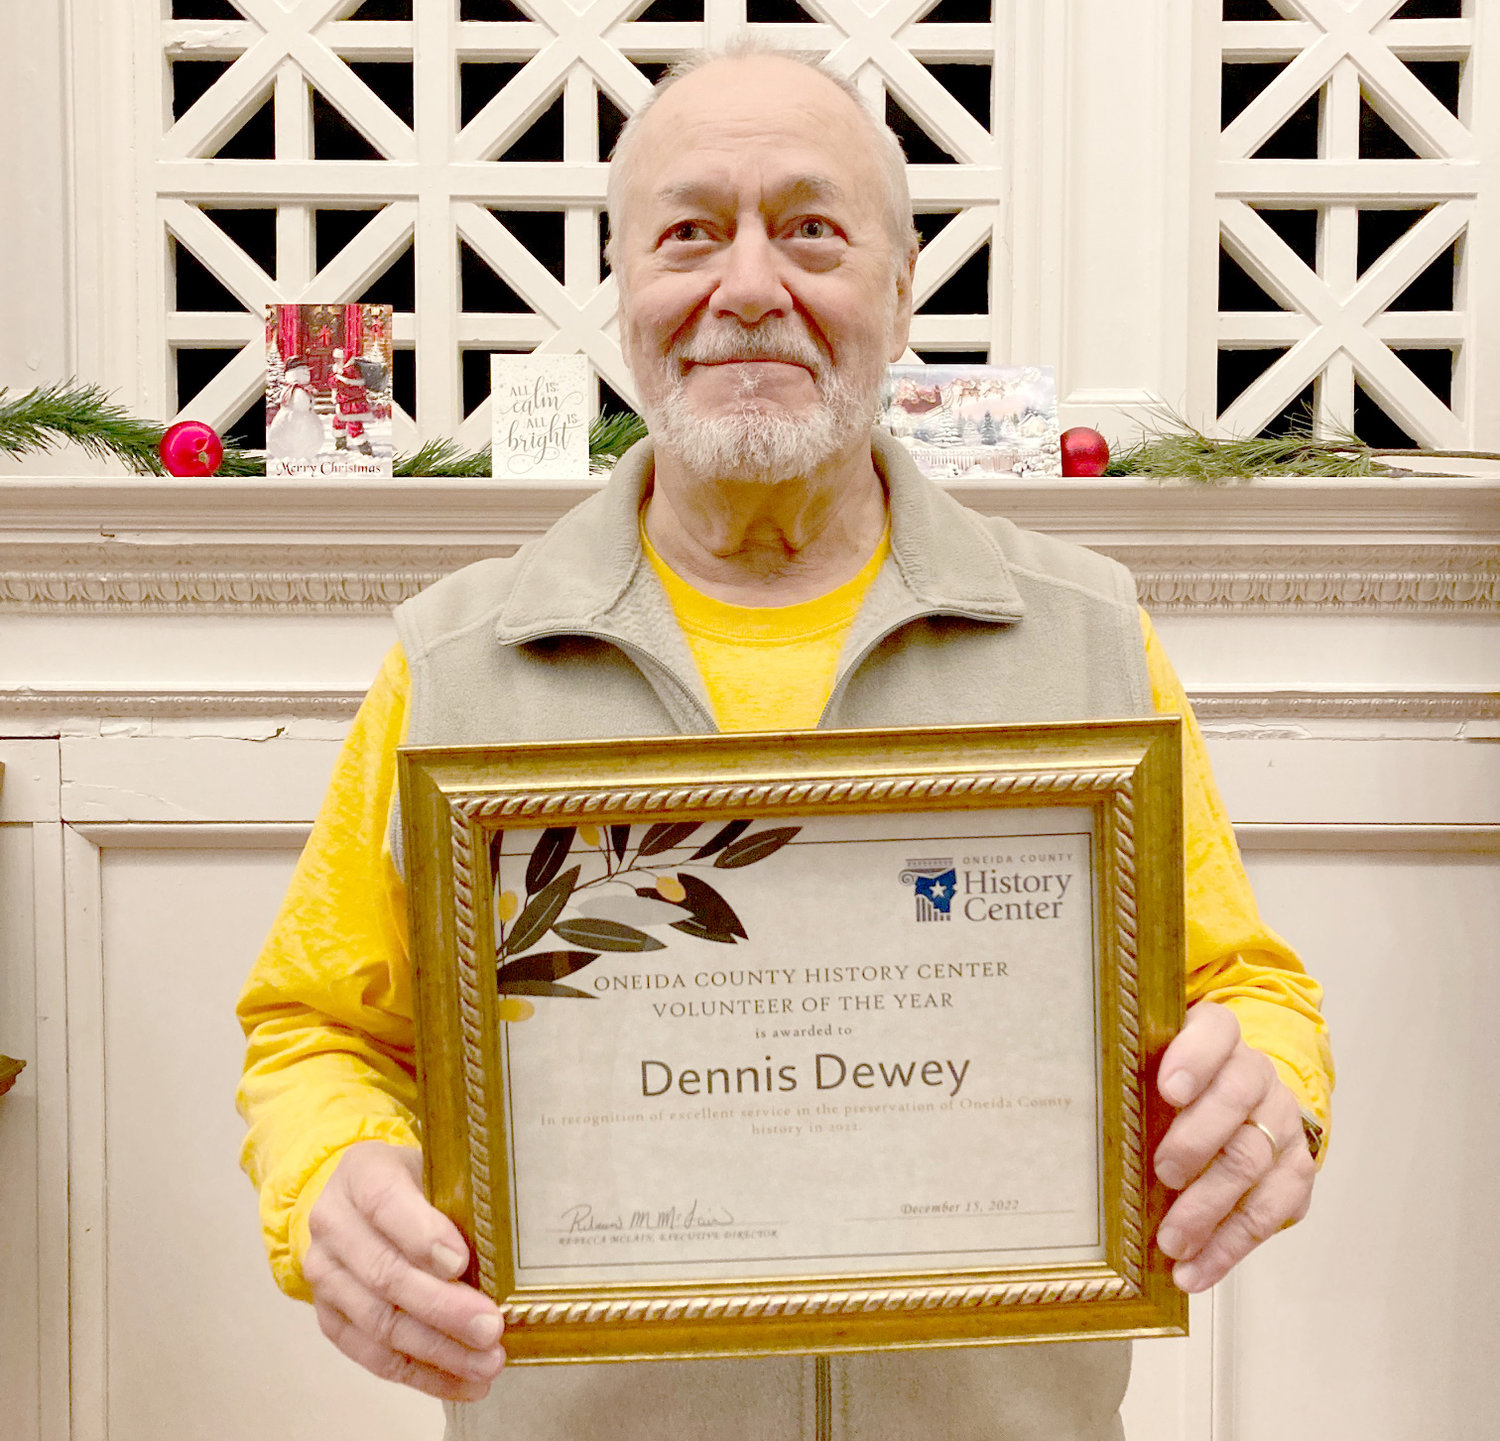 Dennis Dewey, the Oneida County History Center’s Volunteer of the Year holds his award recently. Organization officials said Dewey was chosen for his creativity and dedication to the History Center.